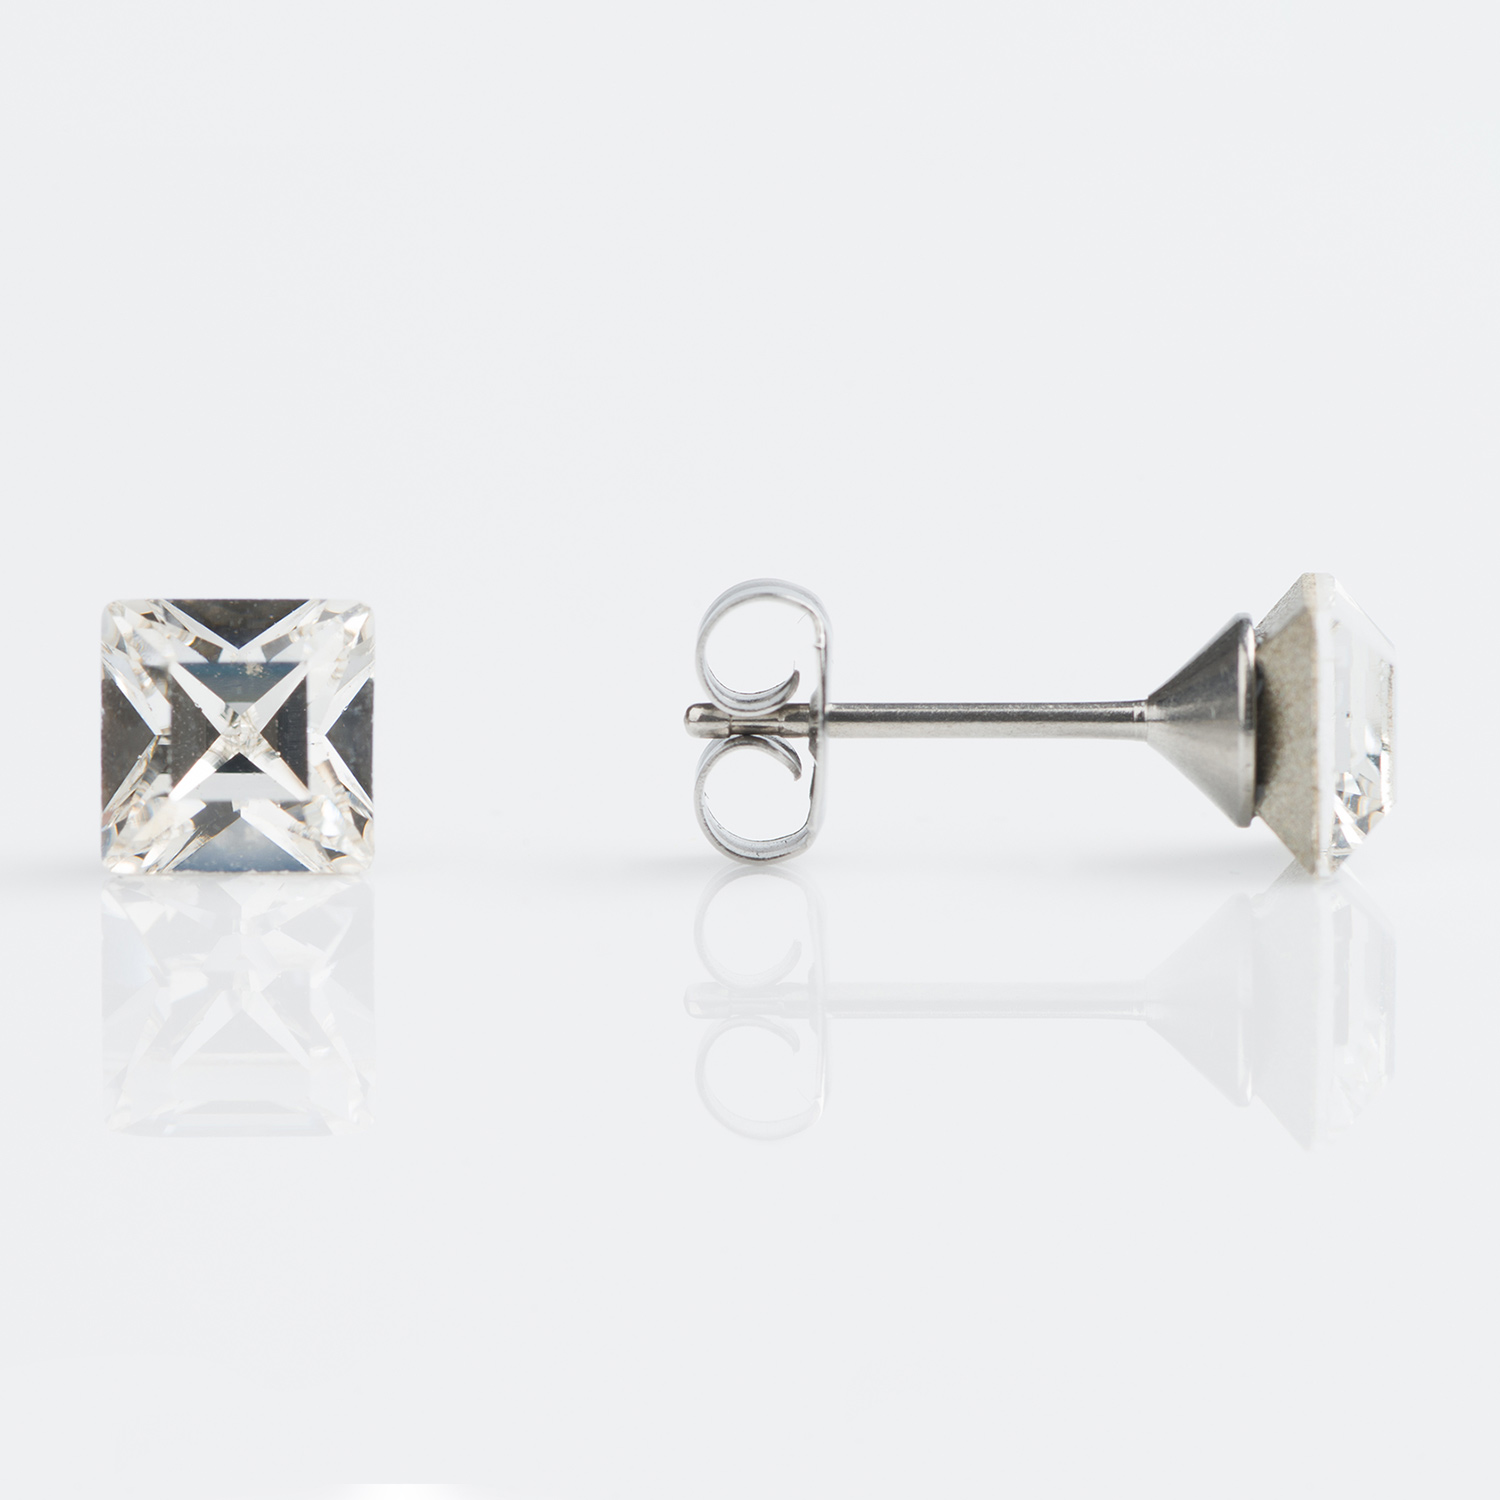 Studex Sensitive Stainless Steel 6mm Crystal Square Earrings